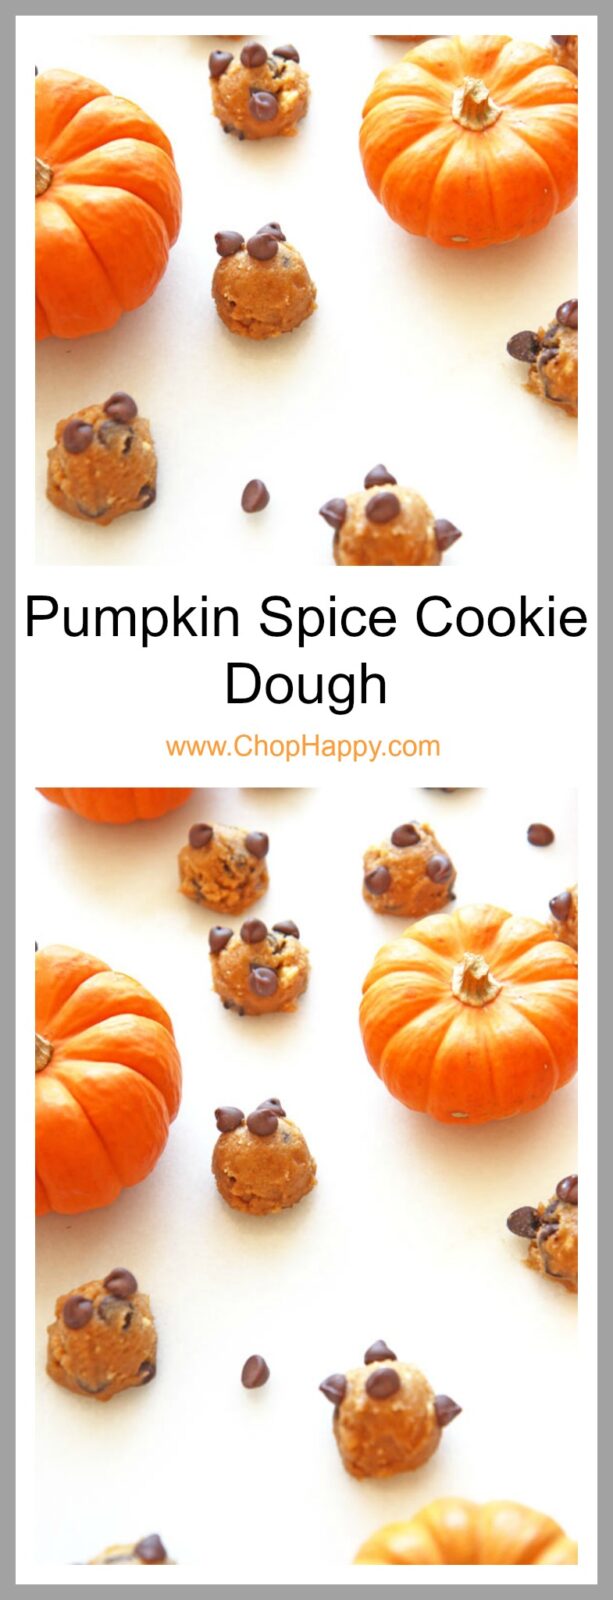 Pumpkin Spice Cookie Dough Recipe - is as easy as drop all the ingredients in the bowl, stir, and eat. Its decadent comfort food dessert. The best part is its a sweet No-Bake dessert. www.ChopHappy.com